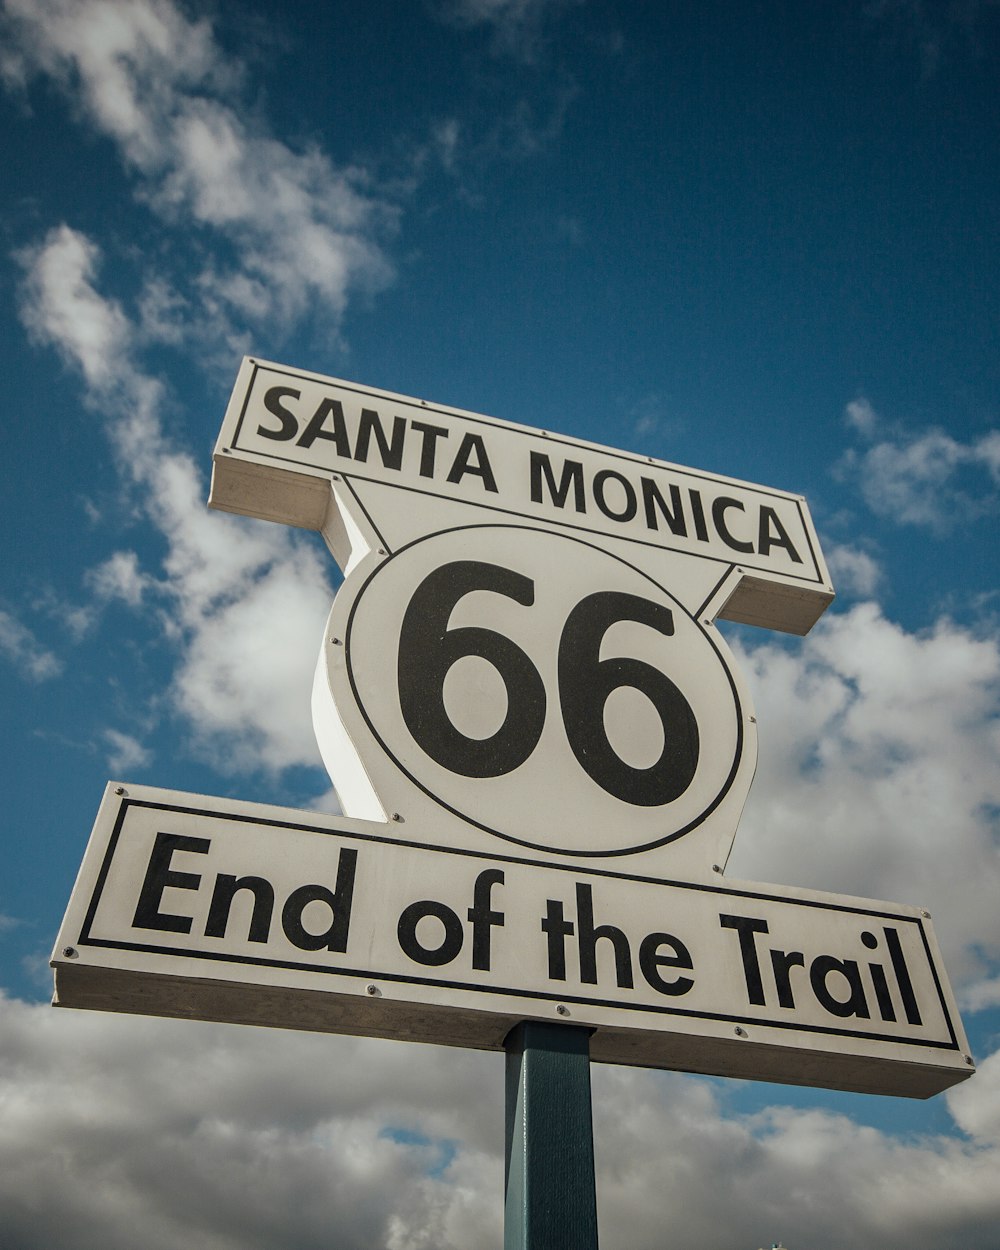 white and black Santa Monica 66 End of the Trail signage